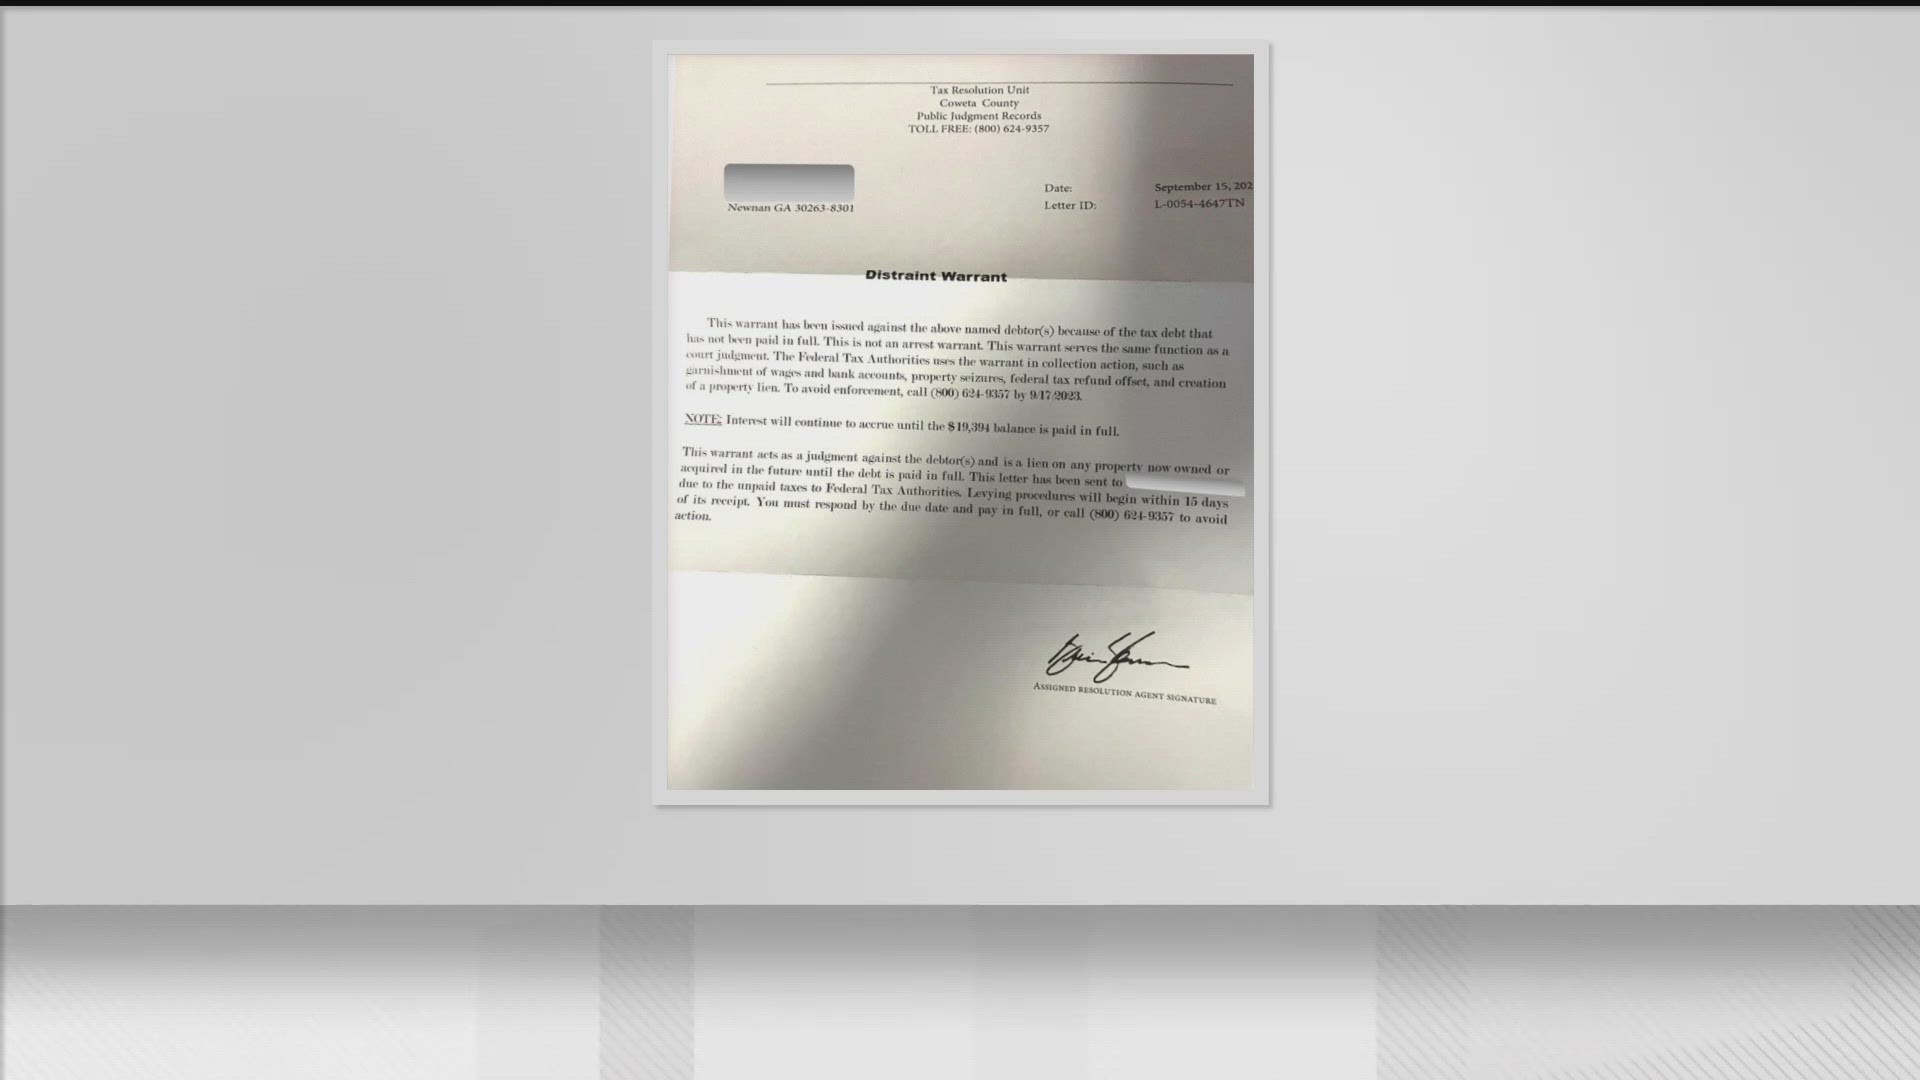 The letter says it is from the tax resolution unit, but the county said they did not send these letters.